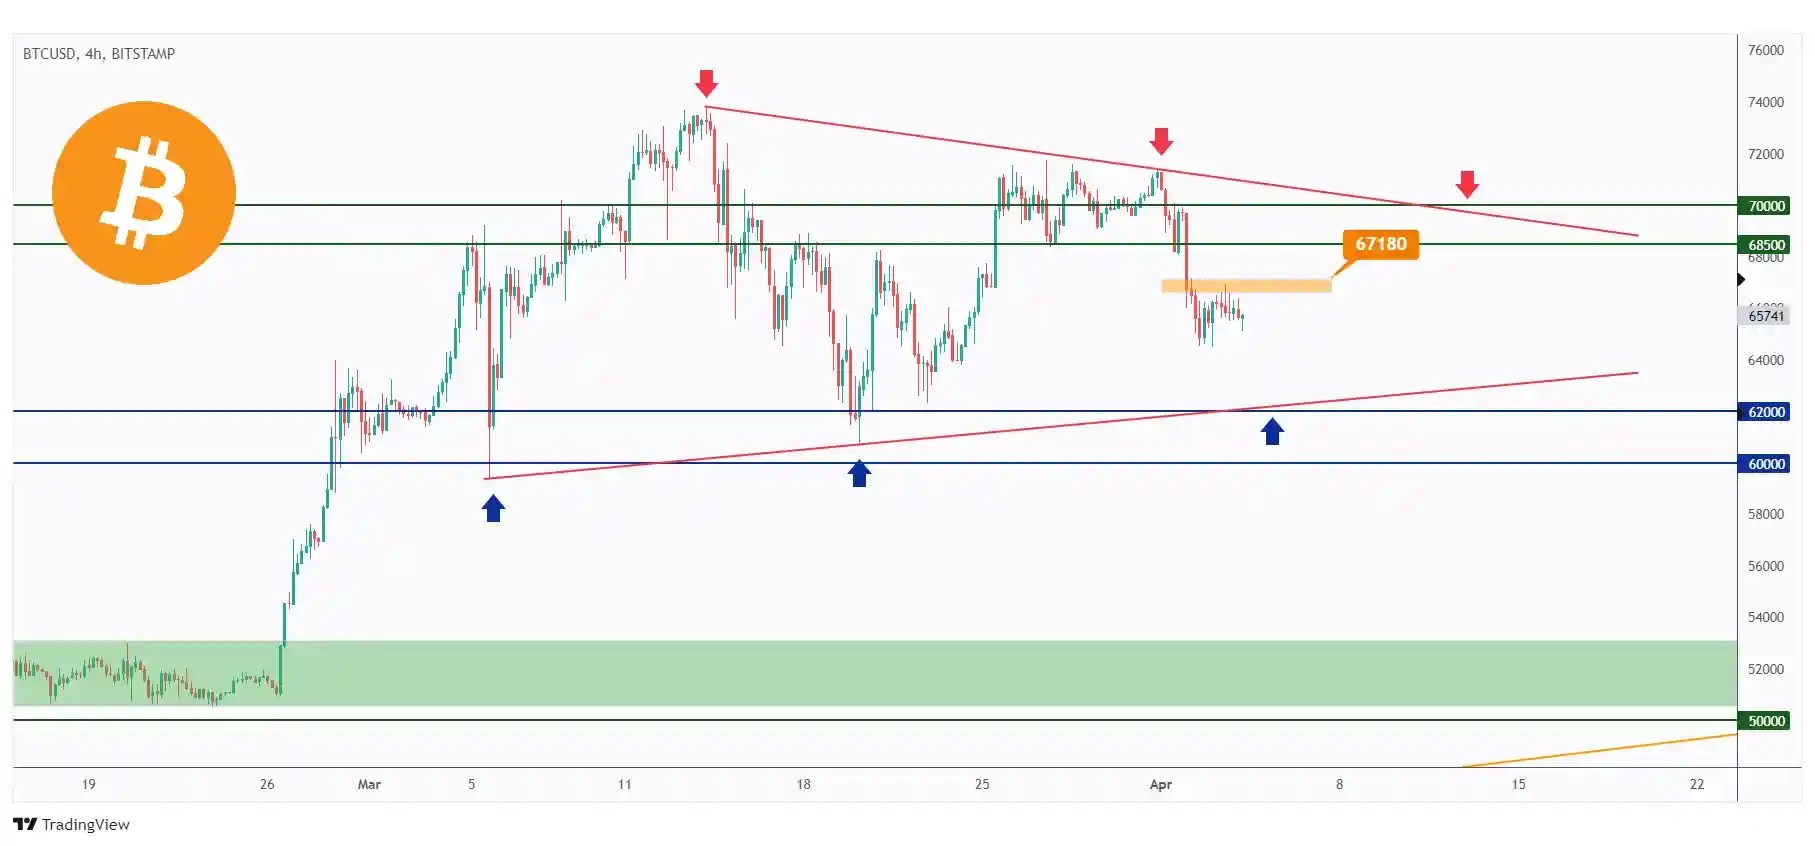 BTC 4h has been ranging trading within the flat symmetrical triangle.